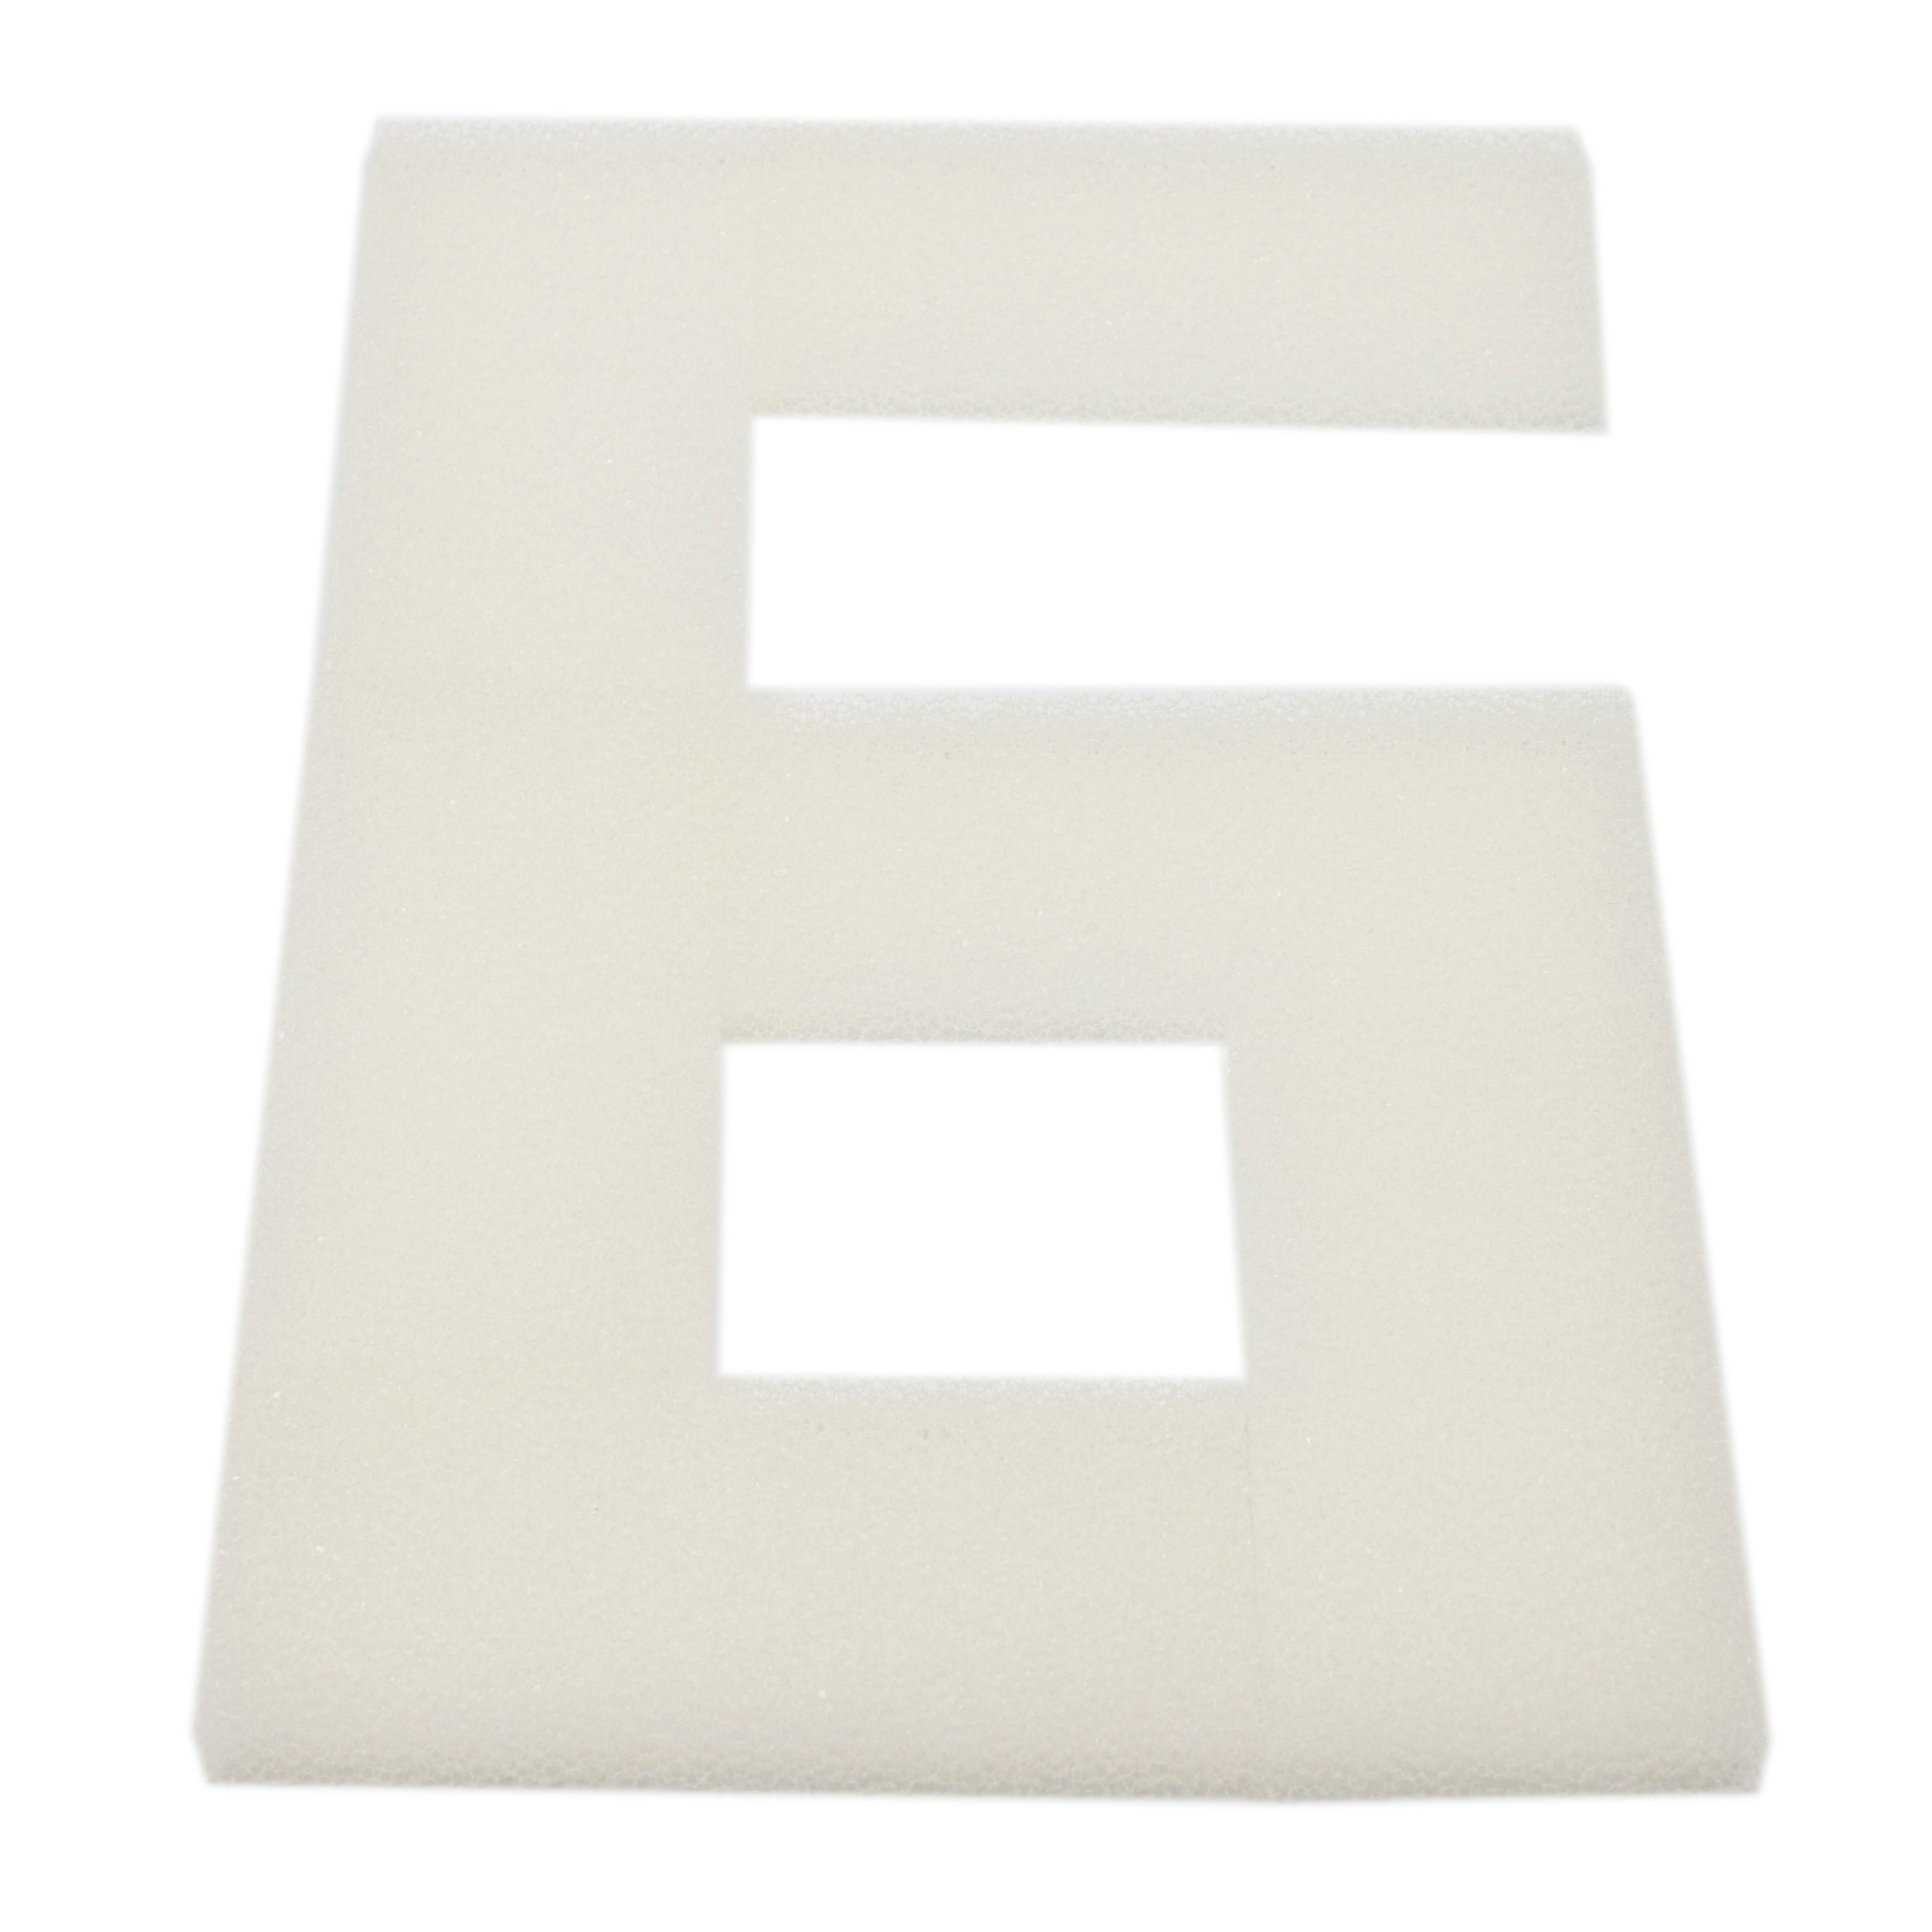 LTWHOME Compatible Foam Filters Non But Suitable for Fluval U2 Filter (Pack of 6)